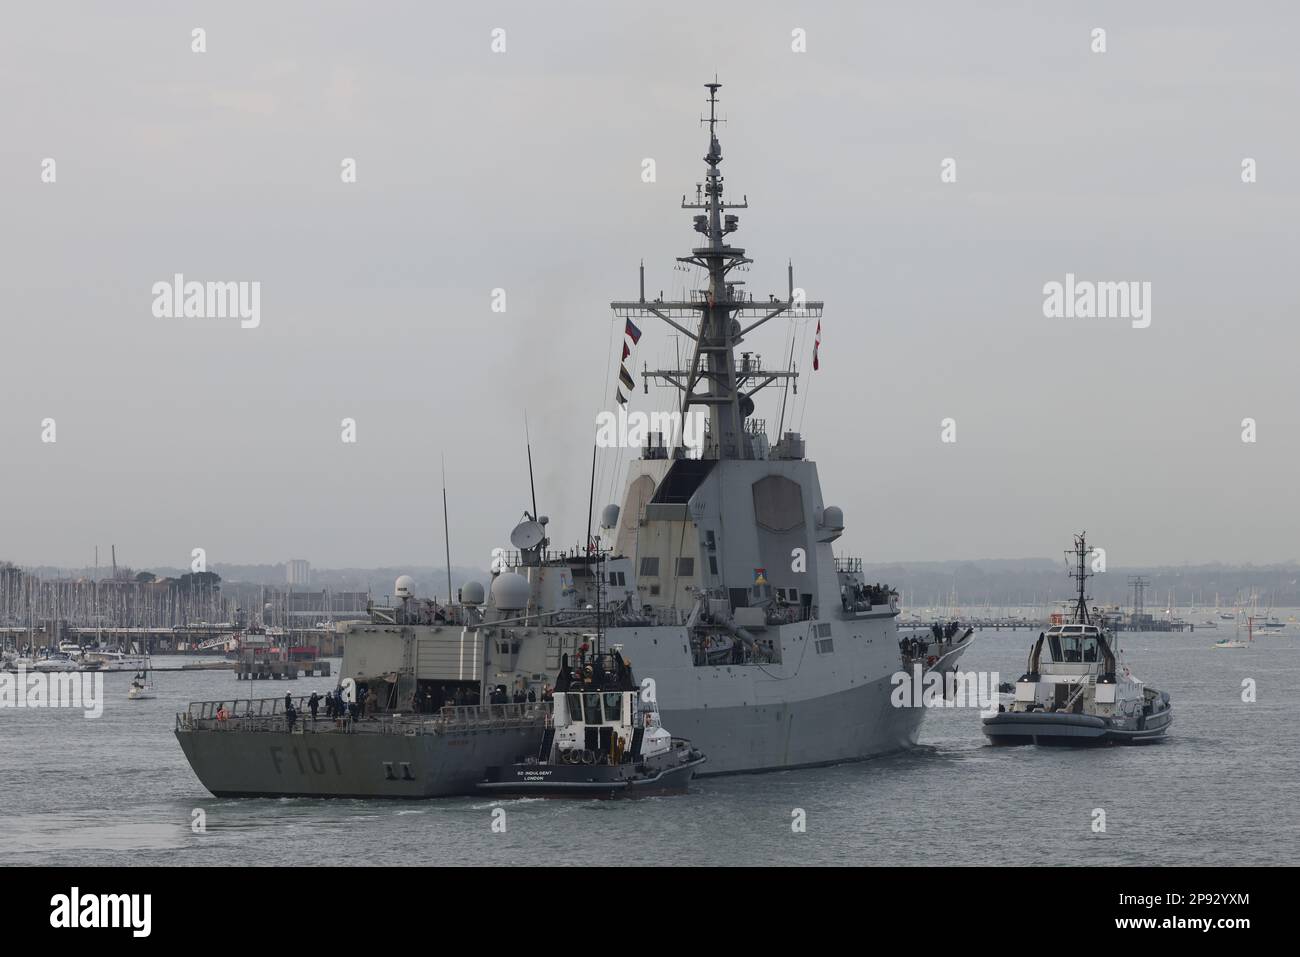 Tugs guide the Spanish navy guided missile frigate ALVARO DE BAZAN towards a berth in the Naval Base Stock Photo